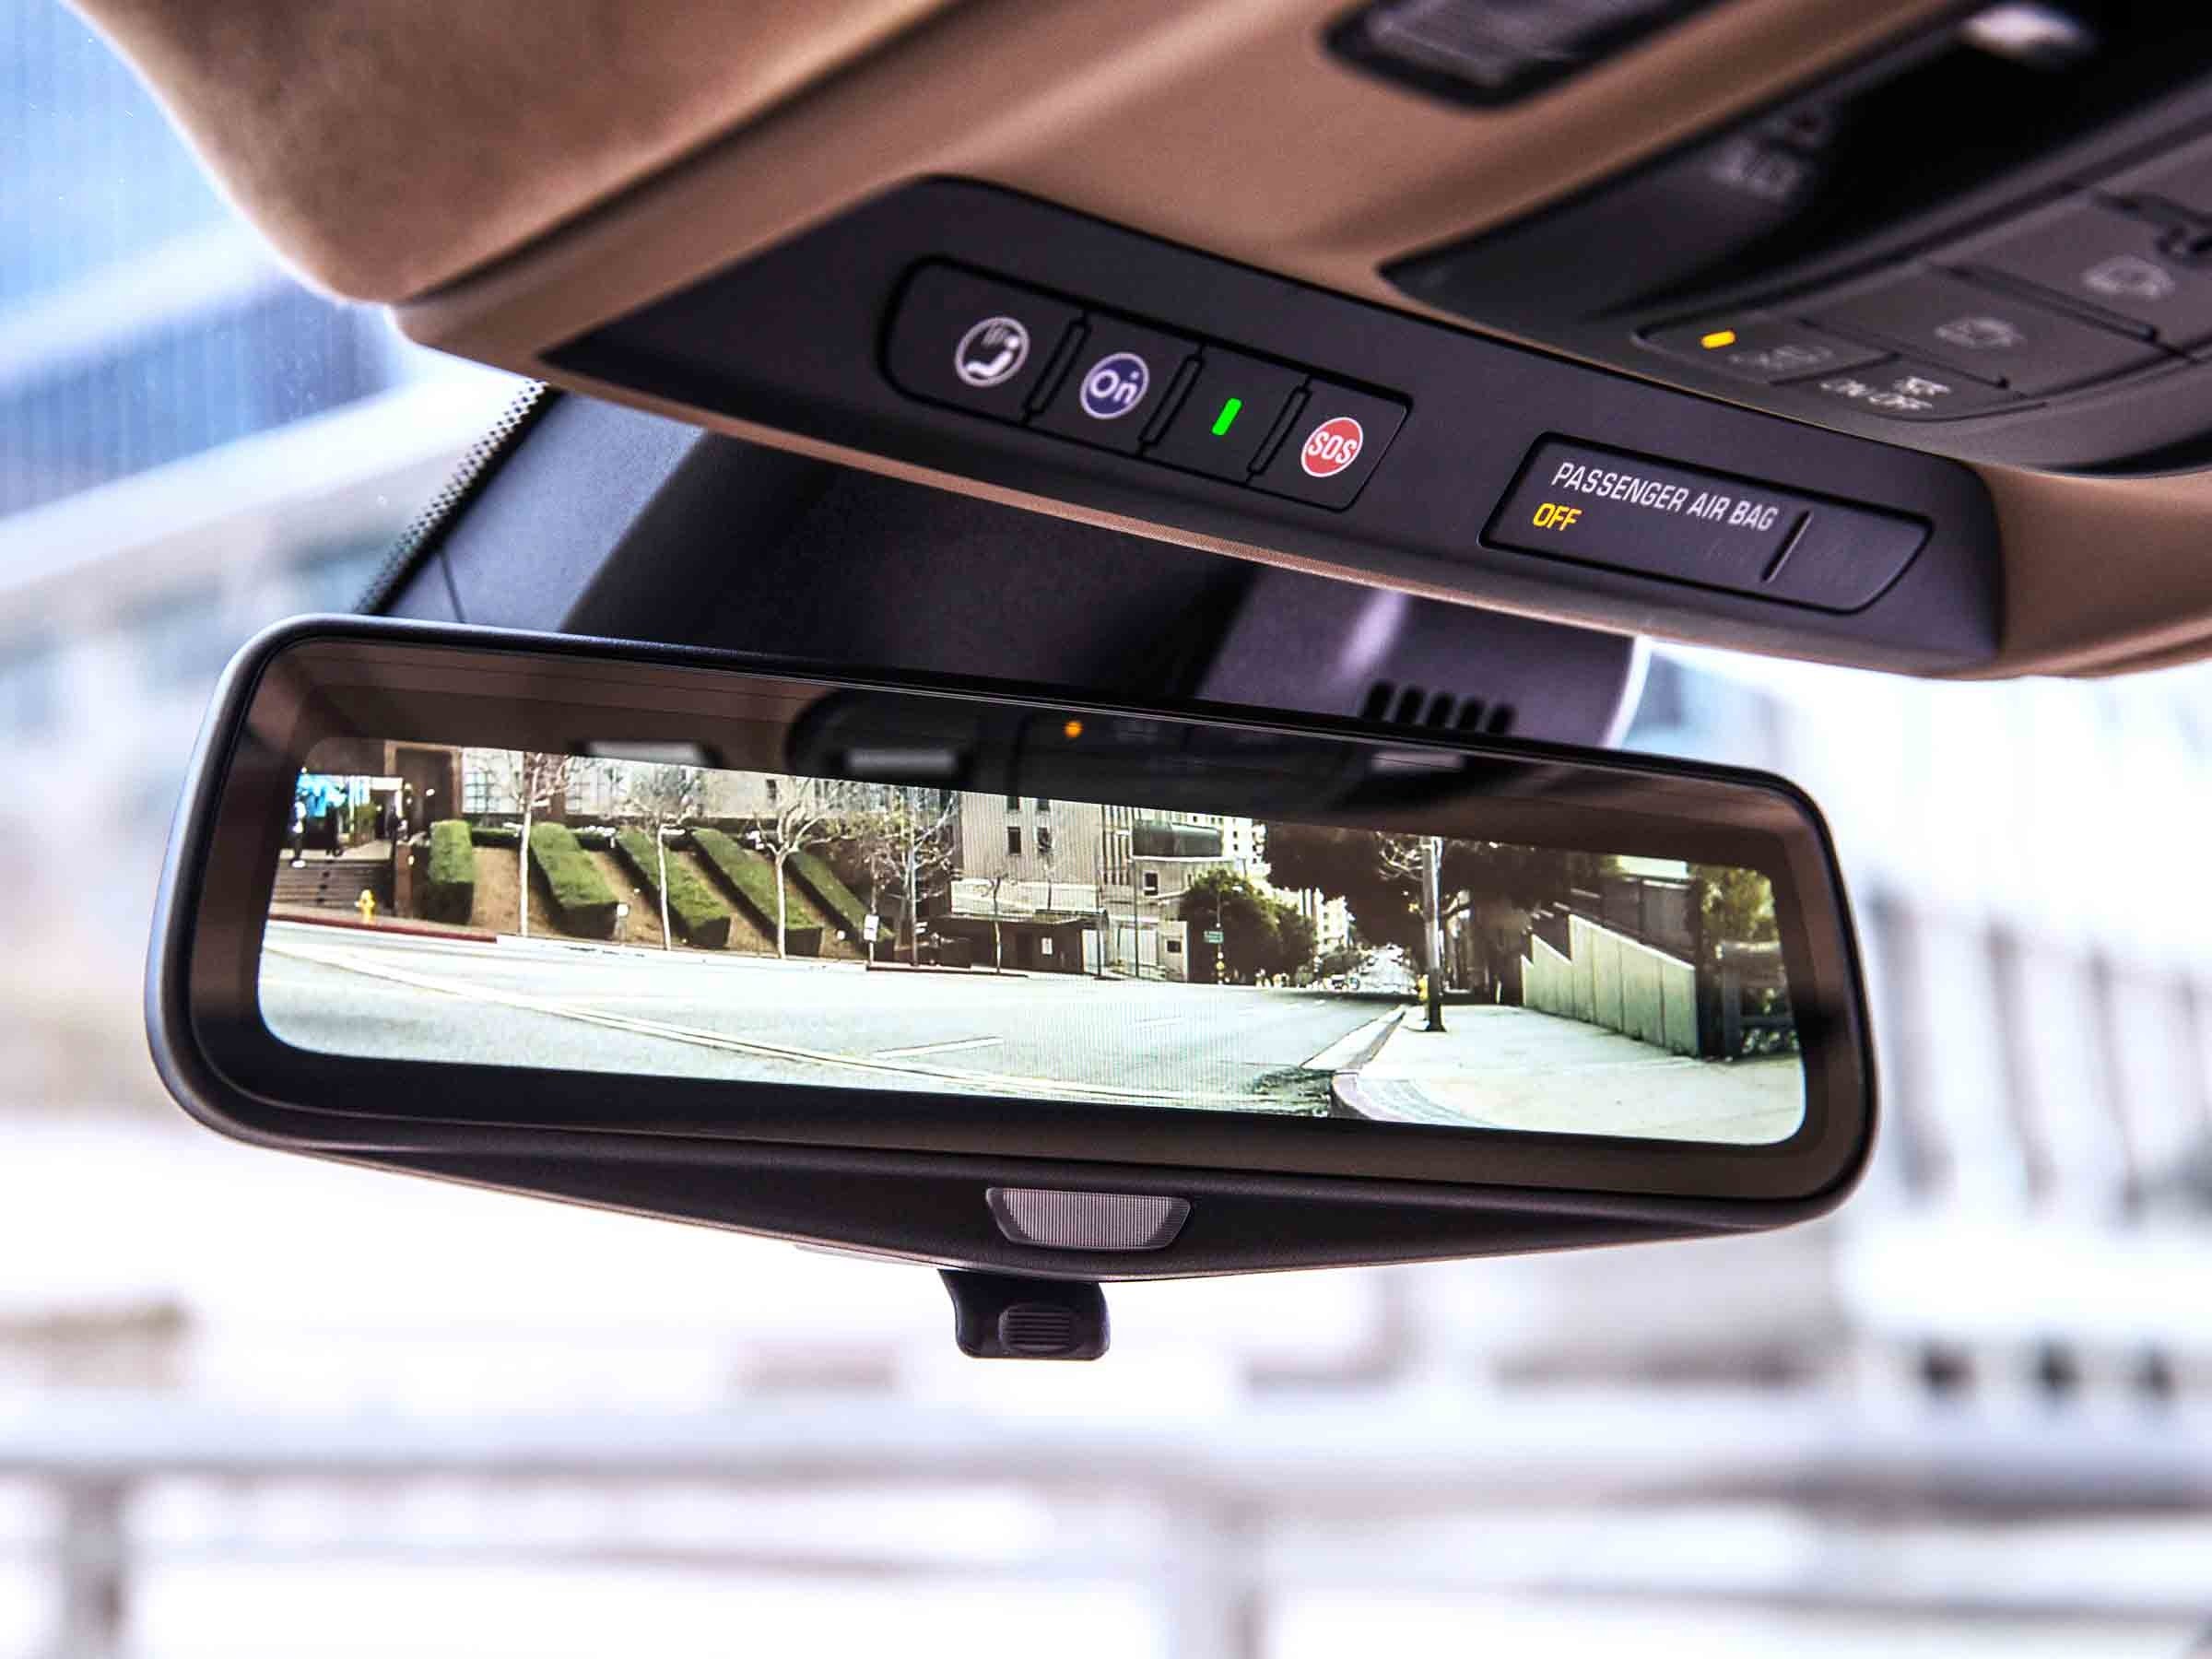 With mirror view. Зеркало Rearview Mirror. Rear view Mirror видеорегистратор. Mercedes 2020 Rearview Mirror.